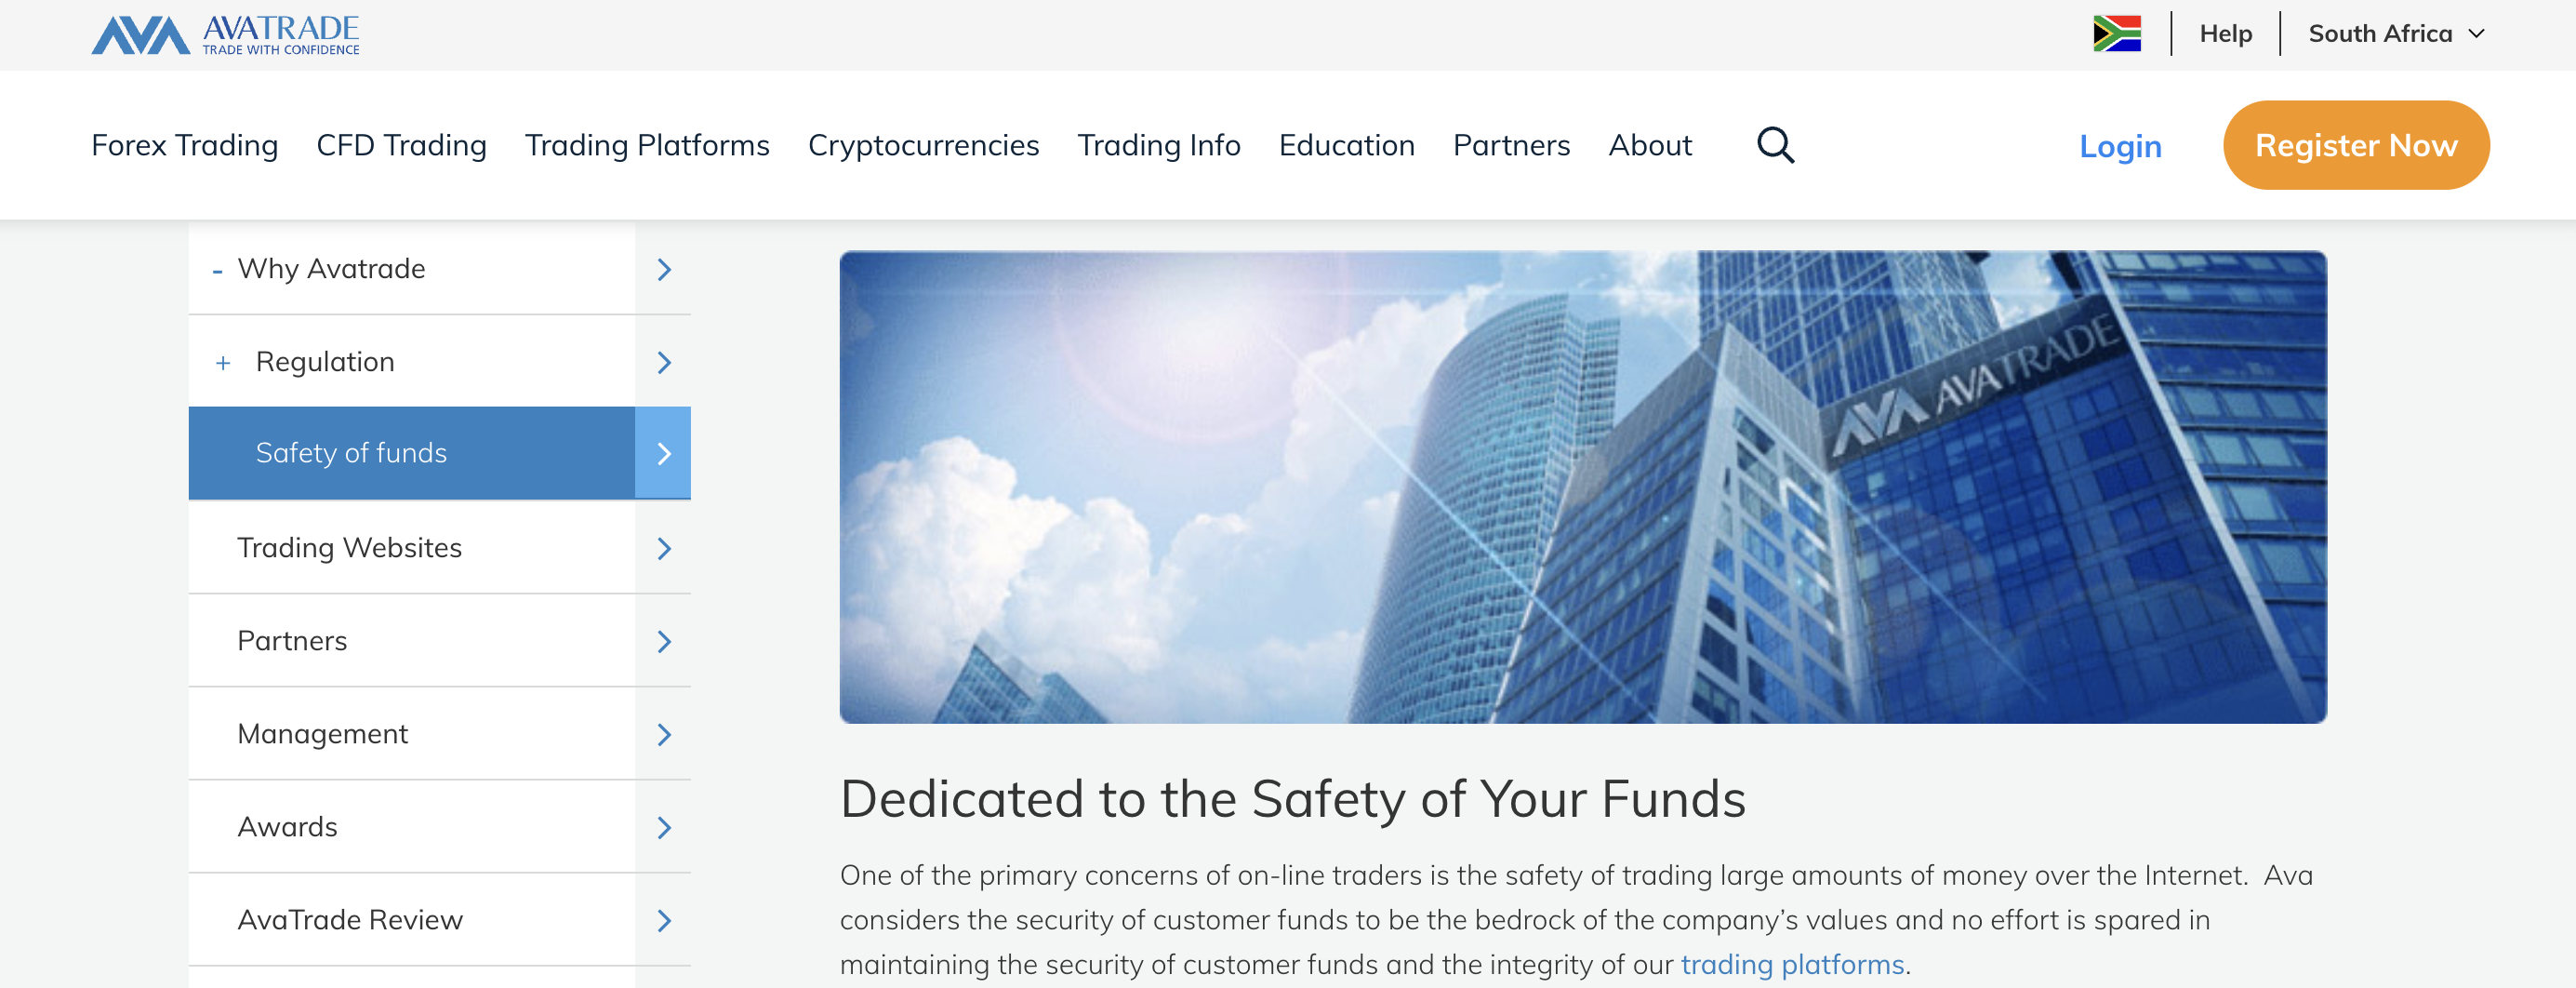 Client Fund Security and Safety Features